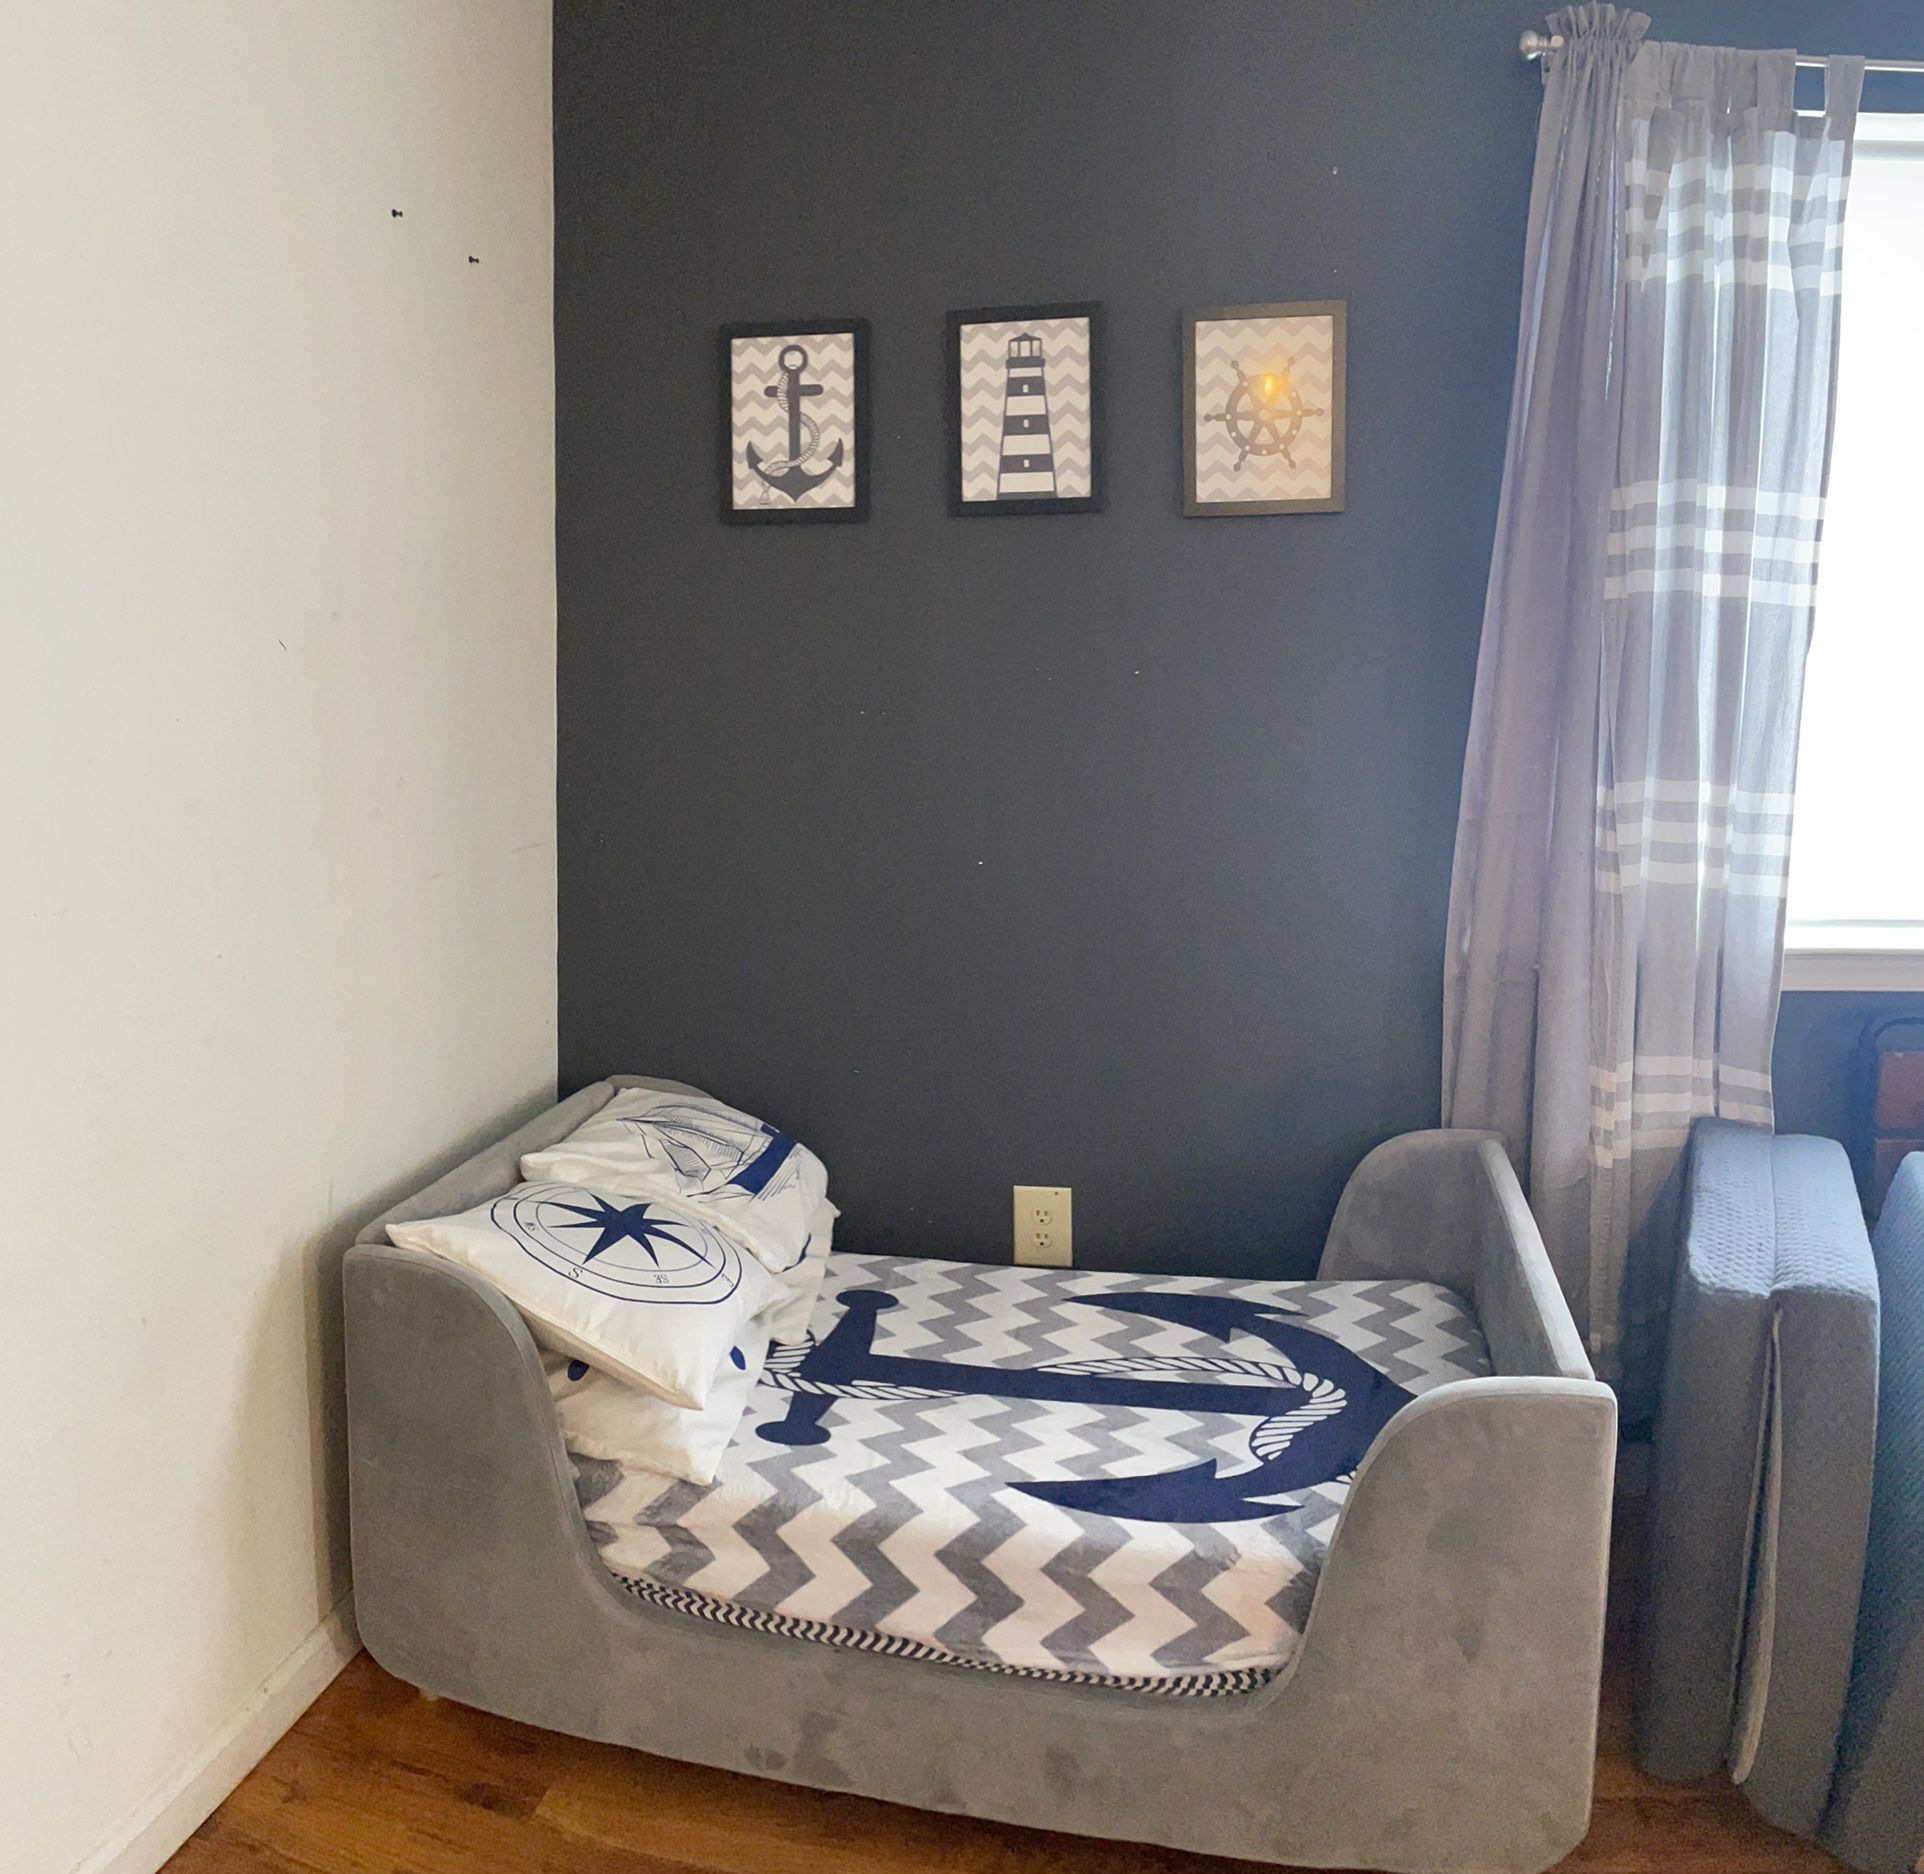 Toddler Bed With Mattresses Included 